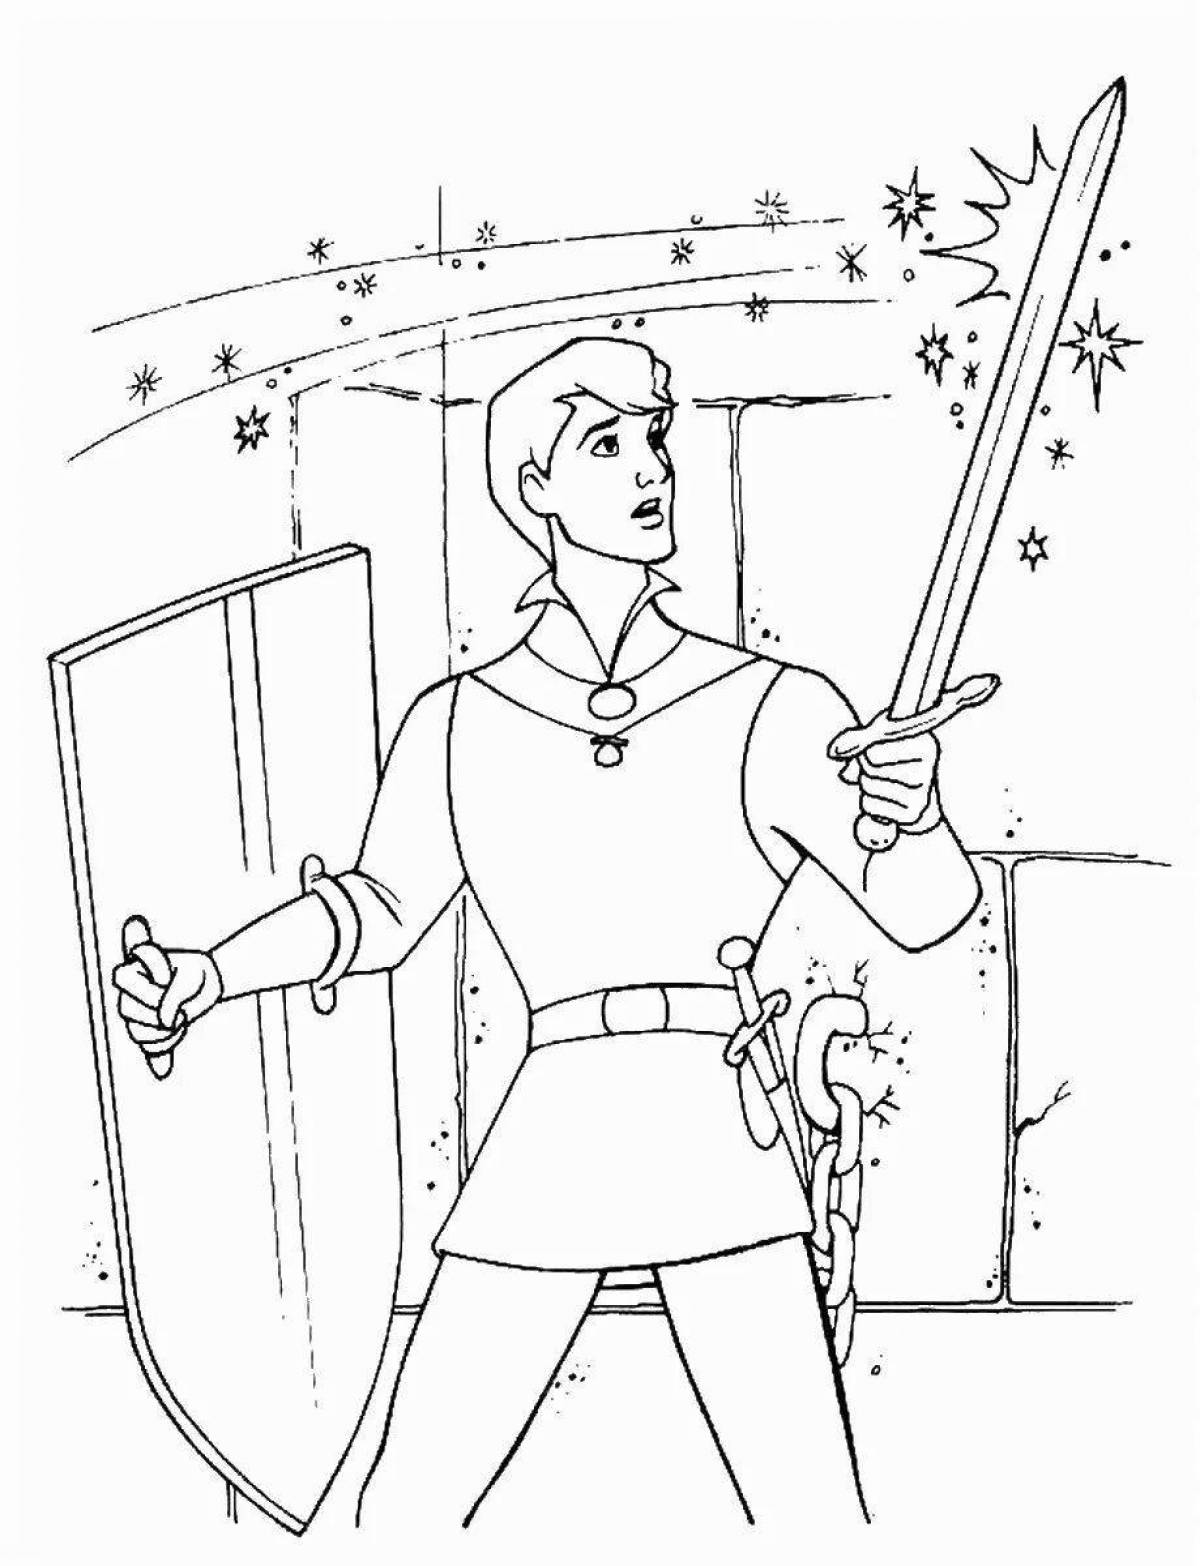 Prince Charming coloring pages for kids